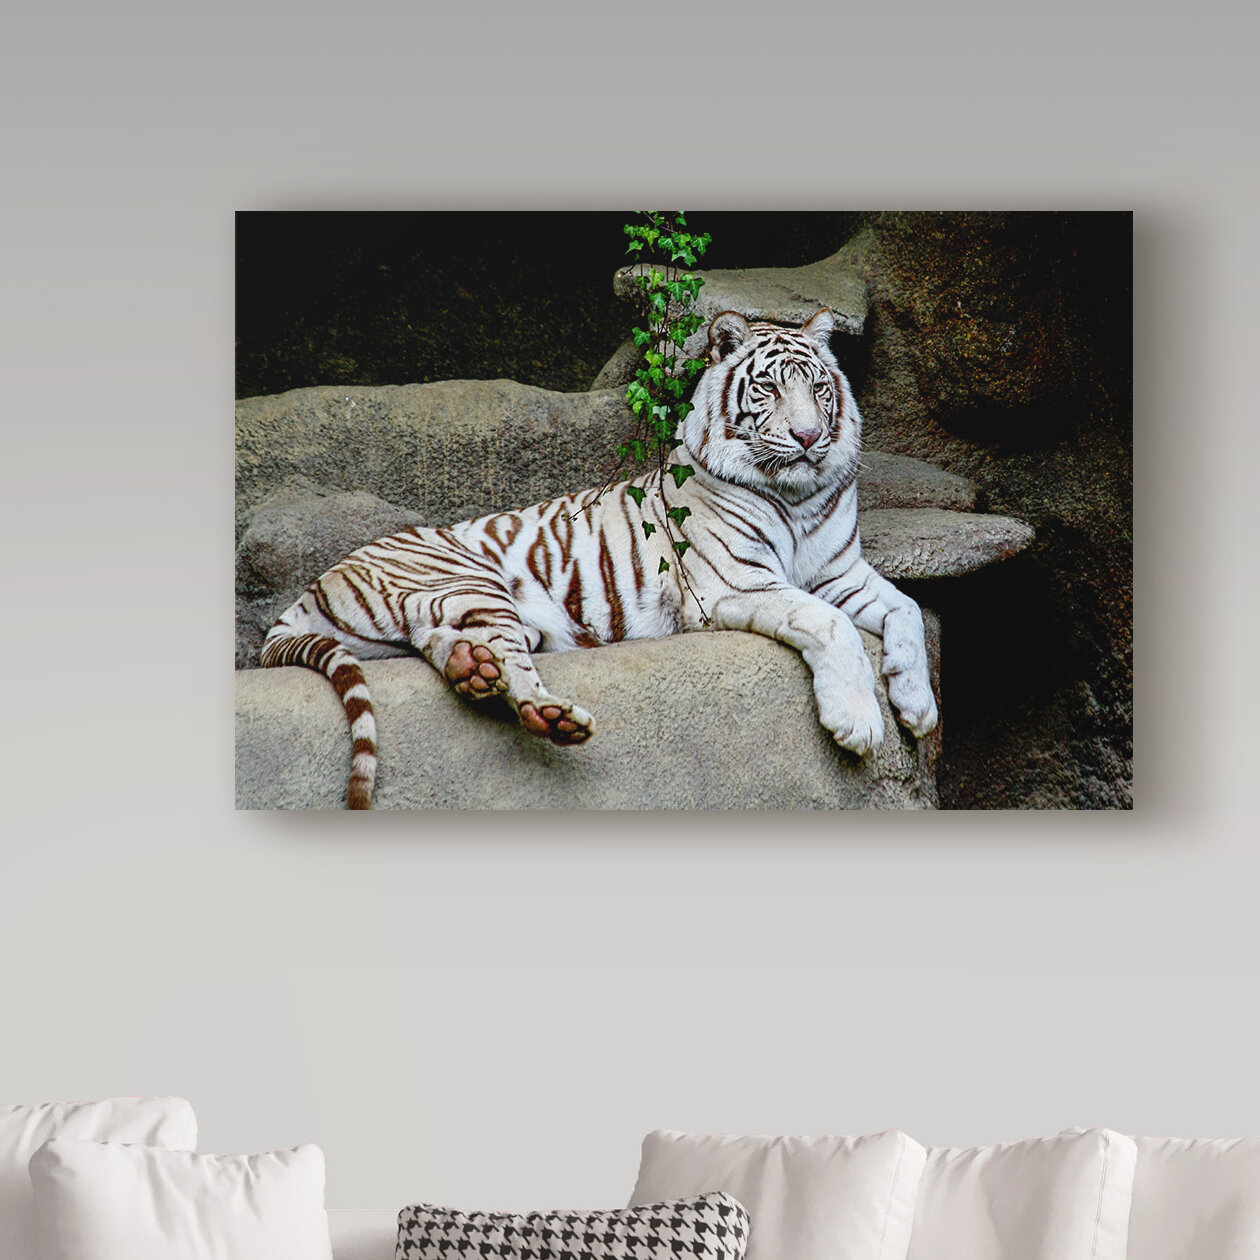 the white tiger themes